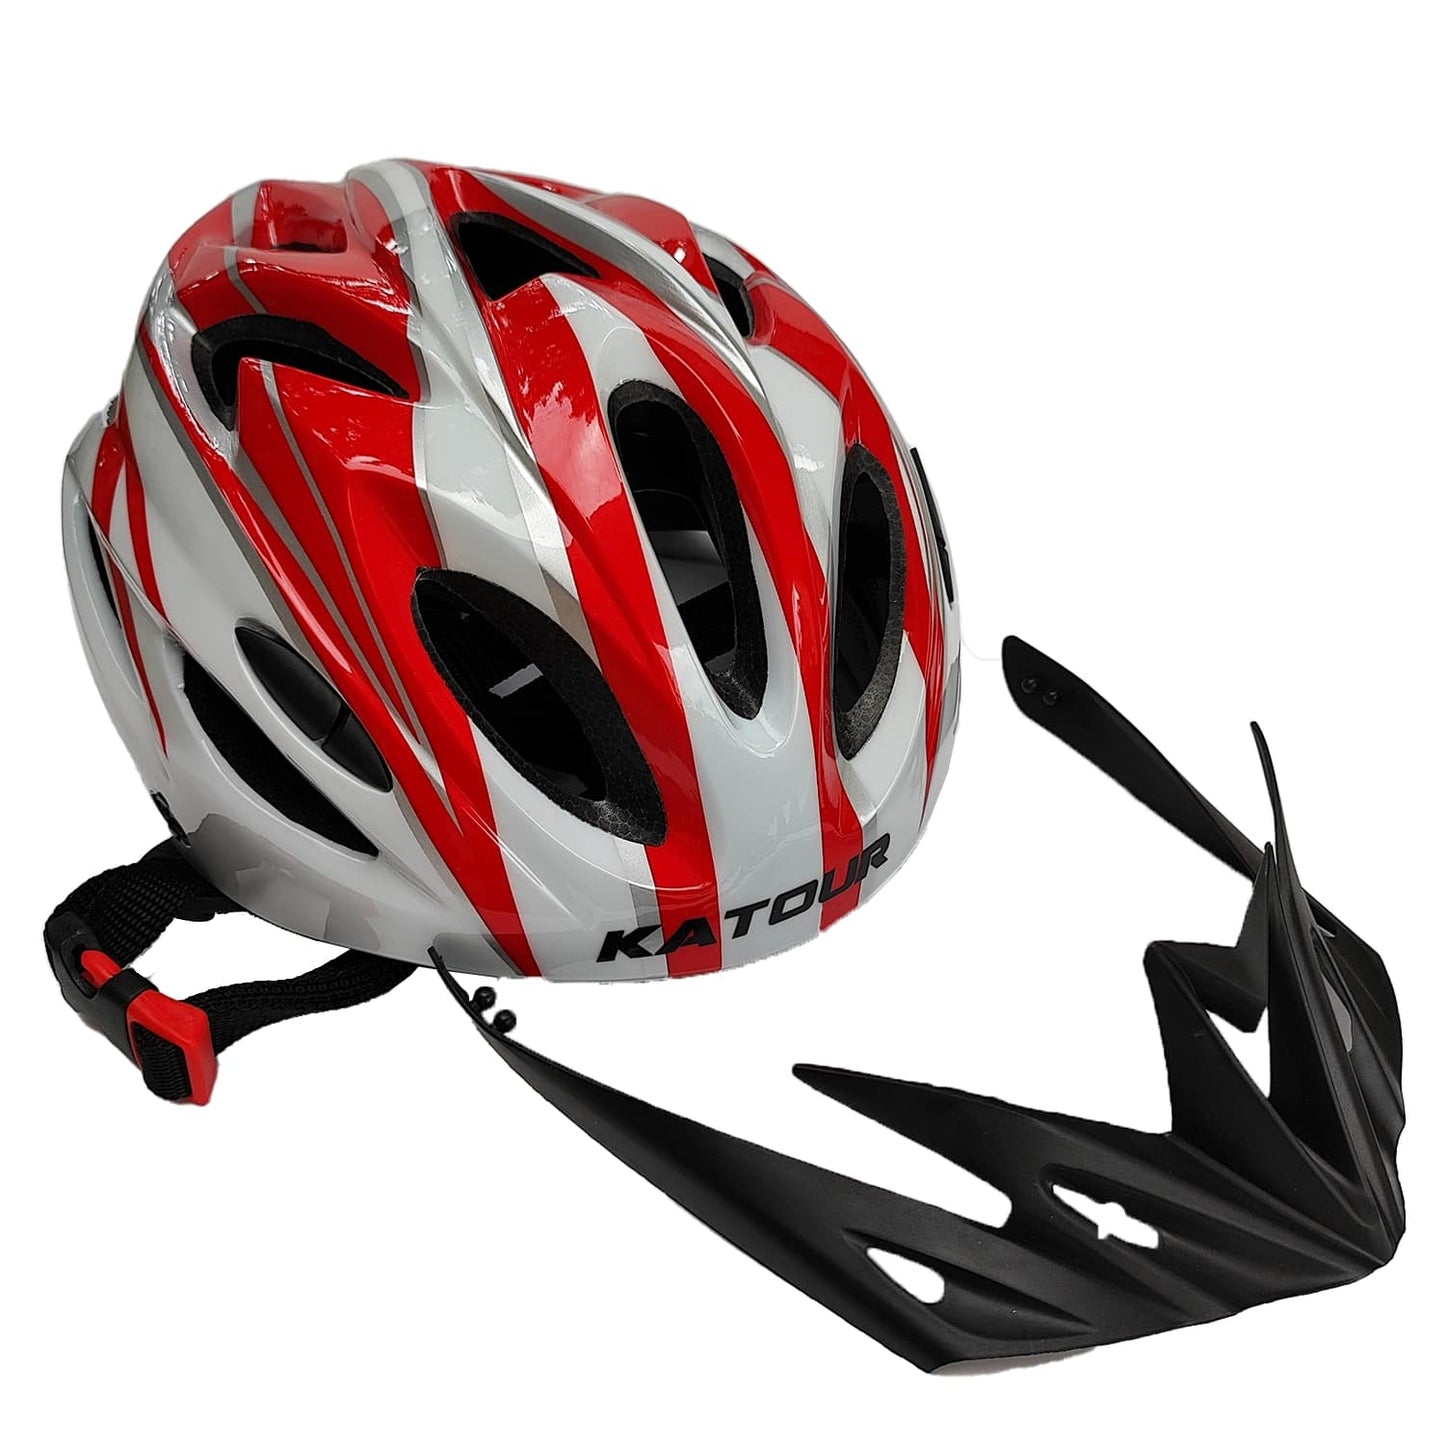 Bicycle helmet red color front head view by omobikes